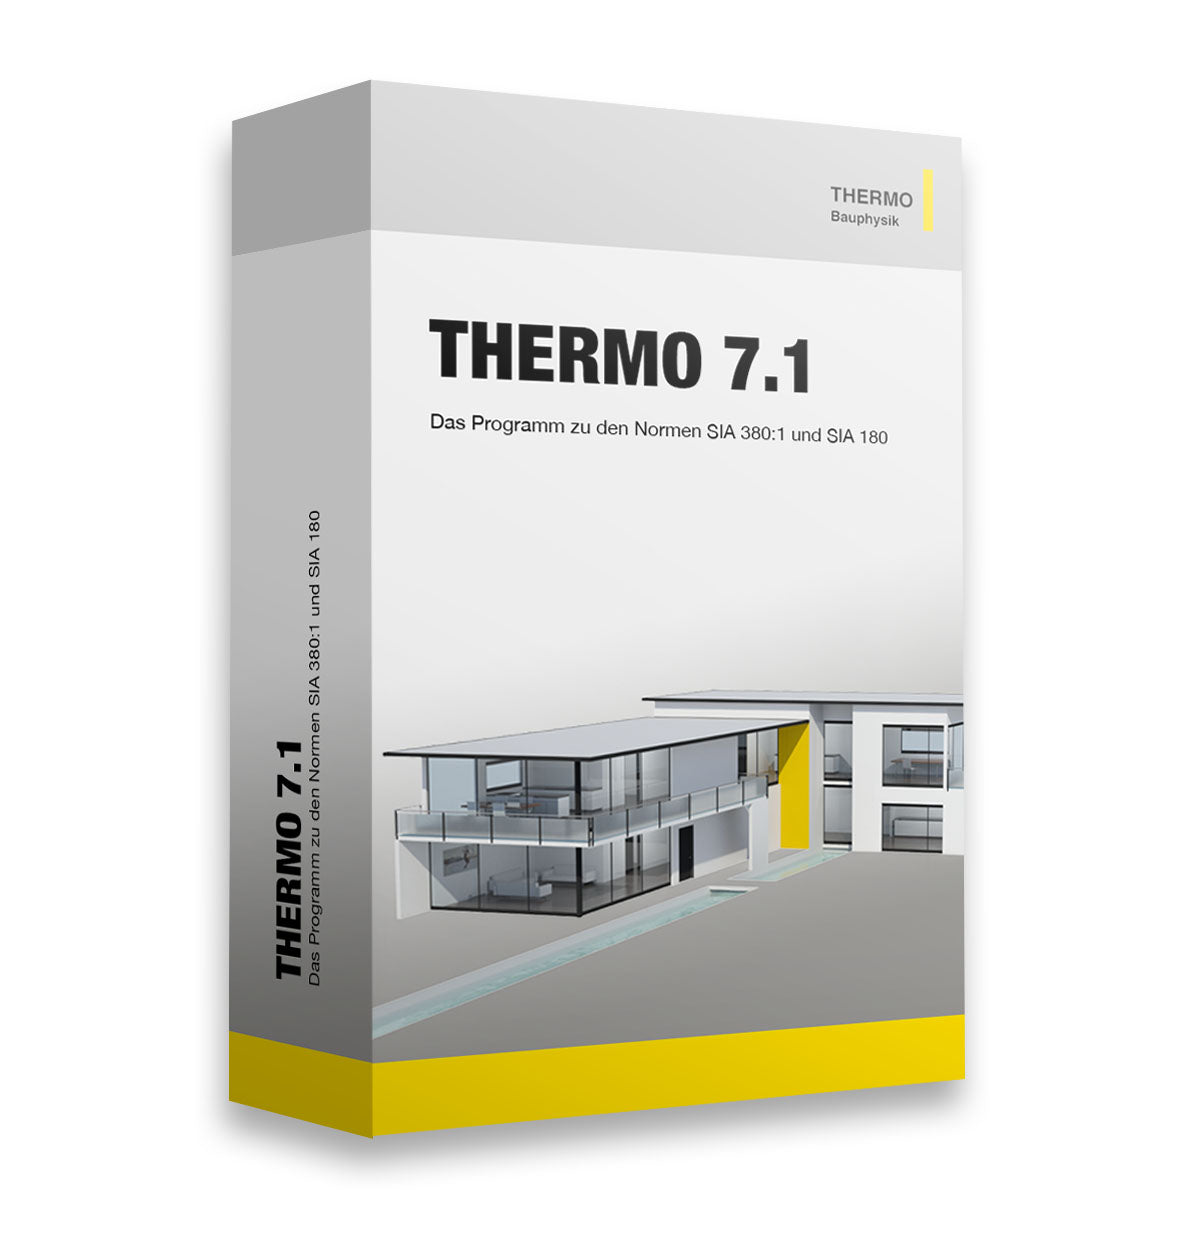 THERMO 7.1